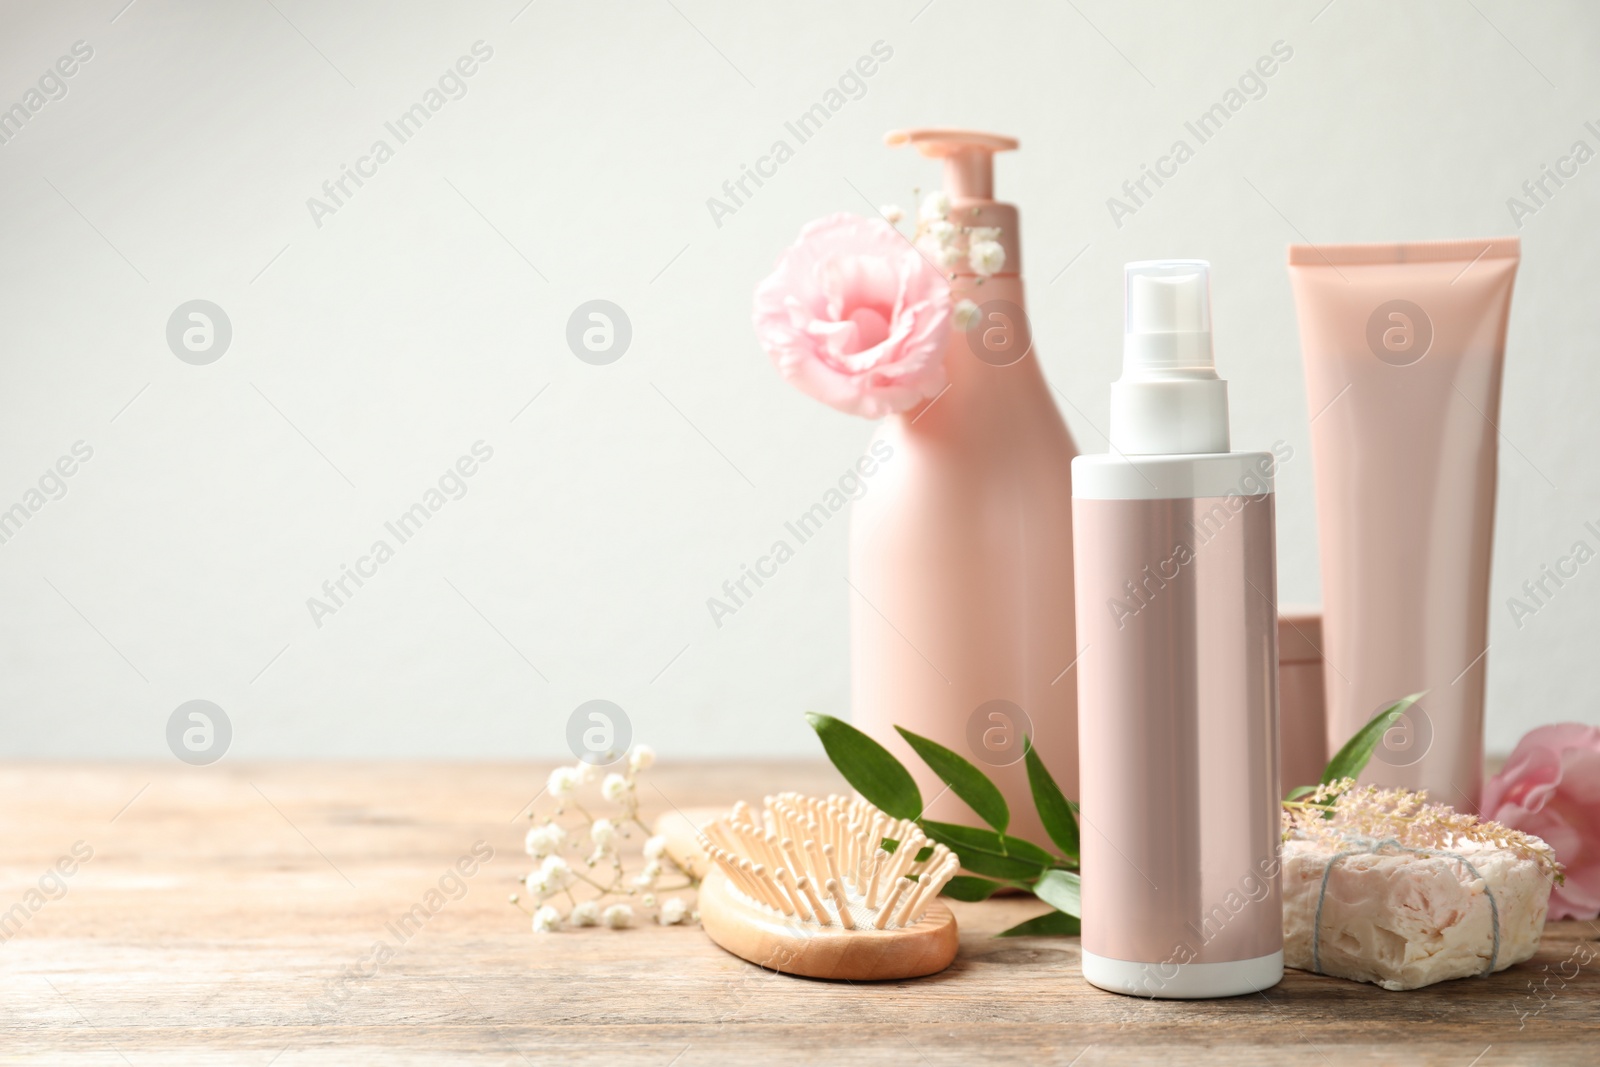 Photo of Set of hair cosmetic products, brush and flowers on wooden table against white background. Space for text